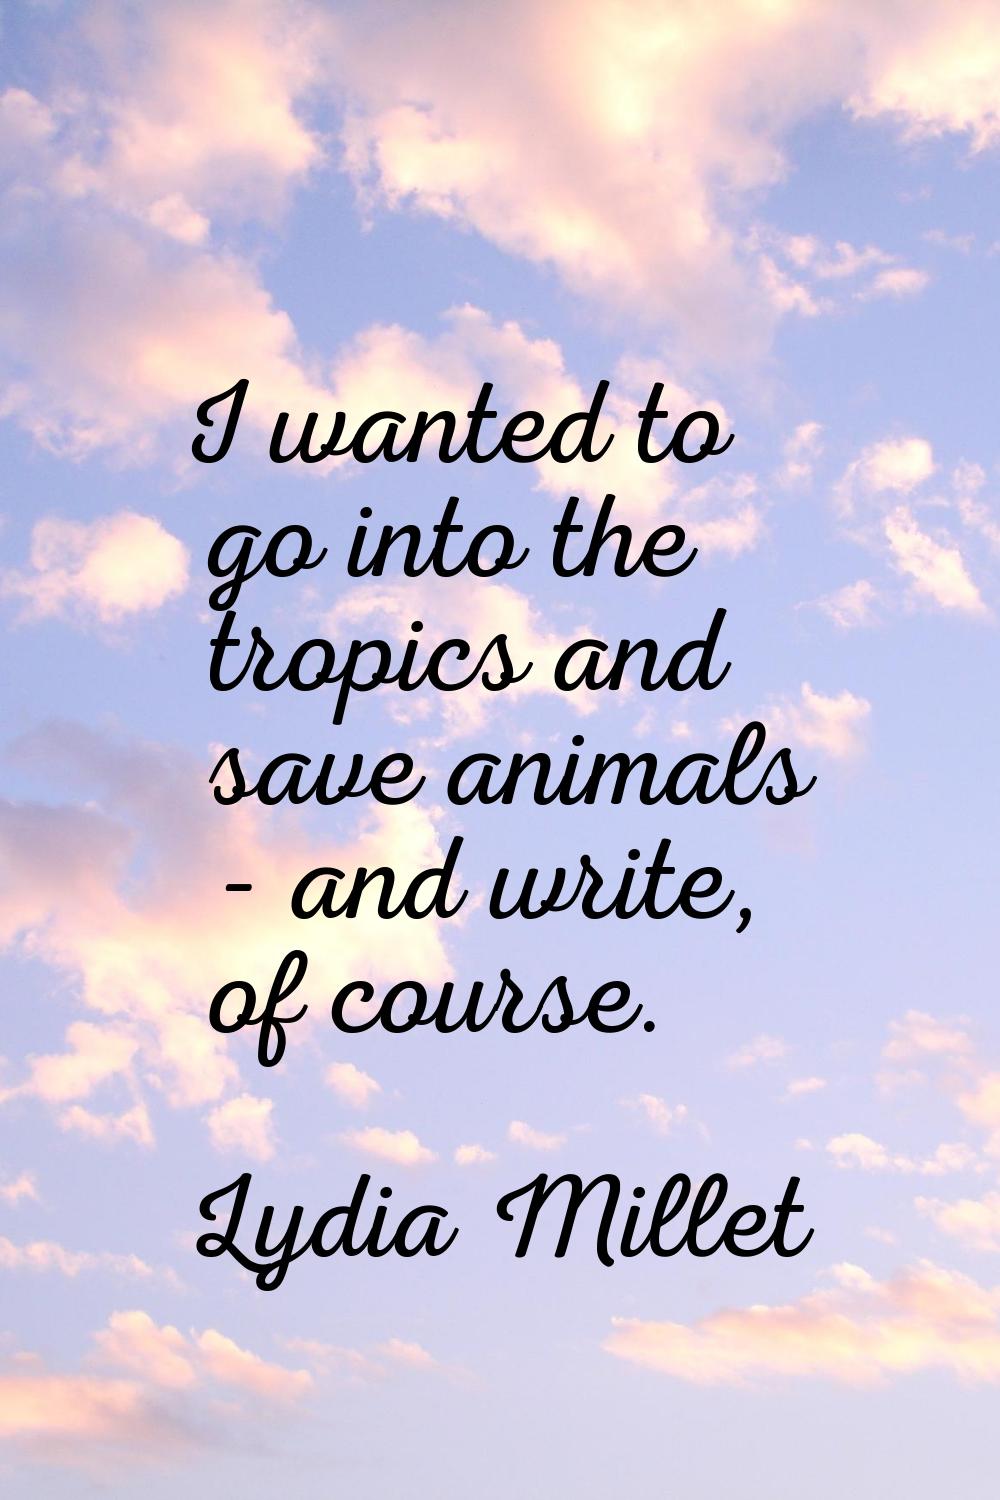 I wanted to go into the tropics and save animals - and write, of course.